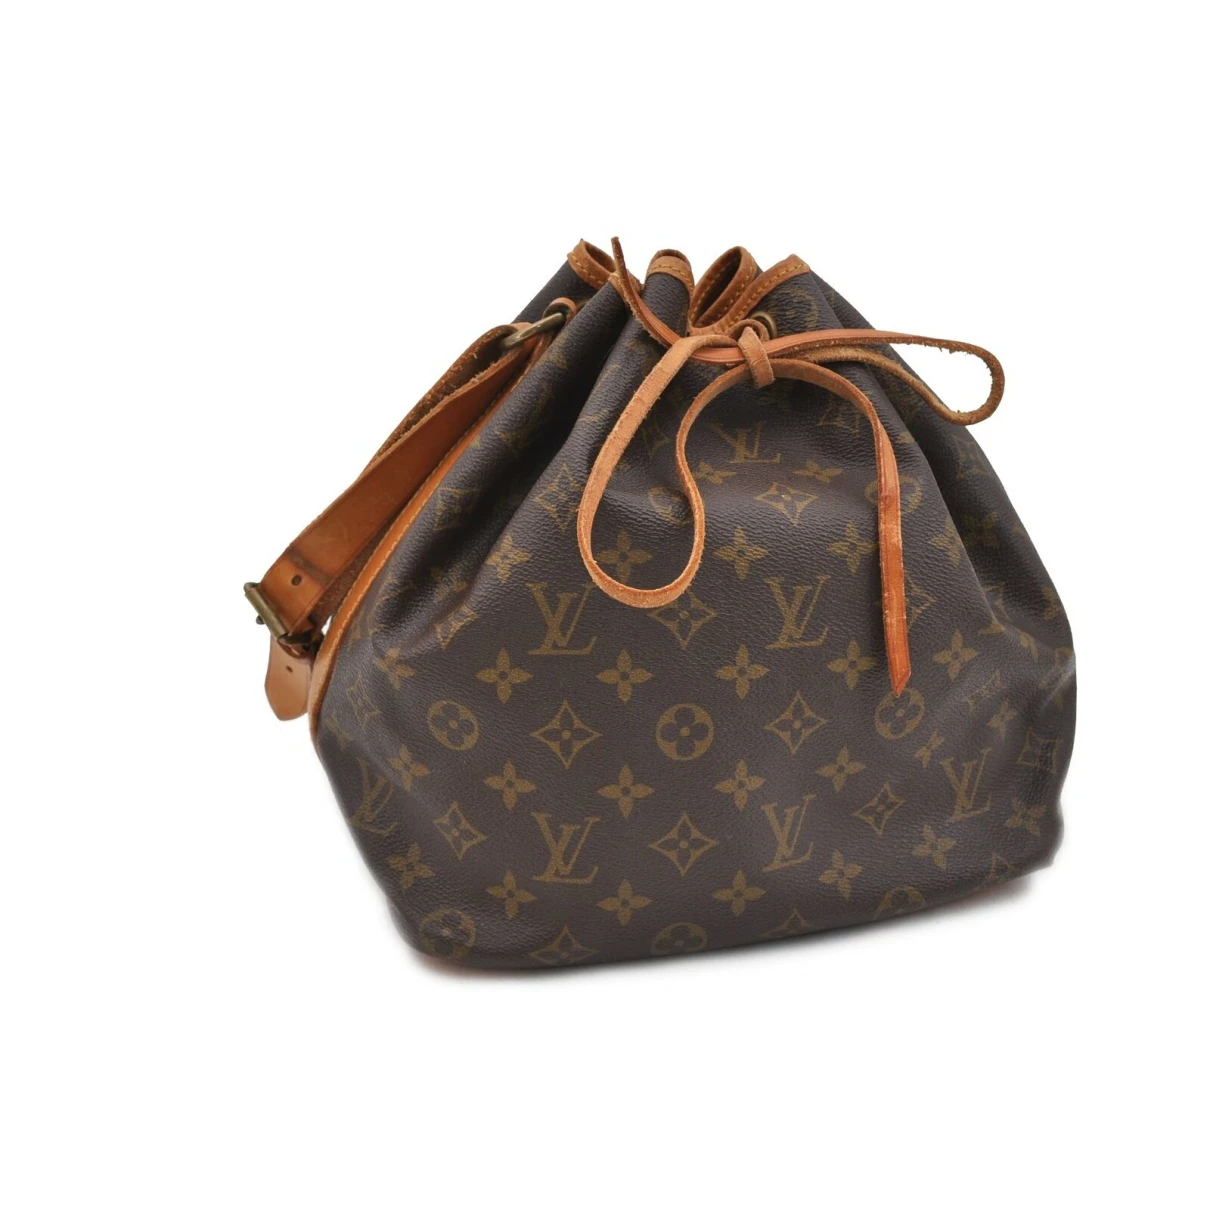 LOUIS VUITTON Bucket bag for women - Buy or Sell your Luxury bags -  Vestiaire Collective